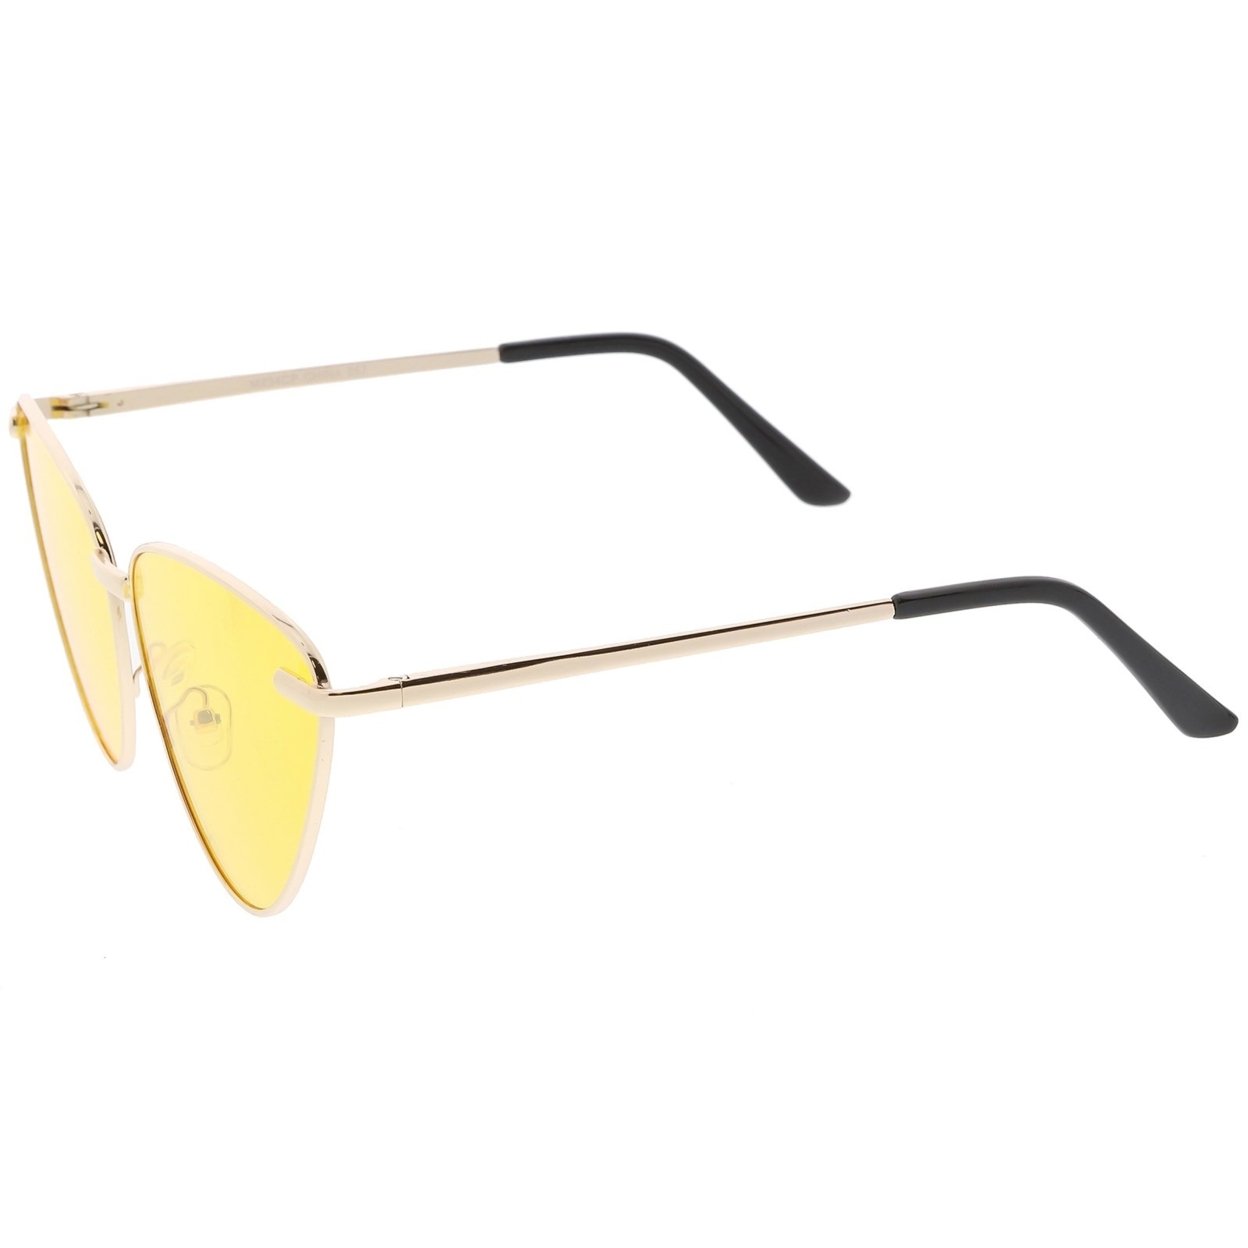 Oversize Cat Eye Sunglasses Thin Metal Frame Color Tinted Flat Lens 64mm - Gold / Yellow